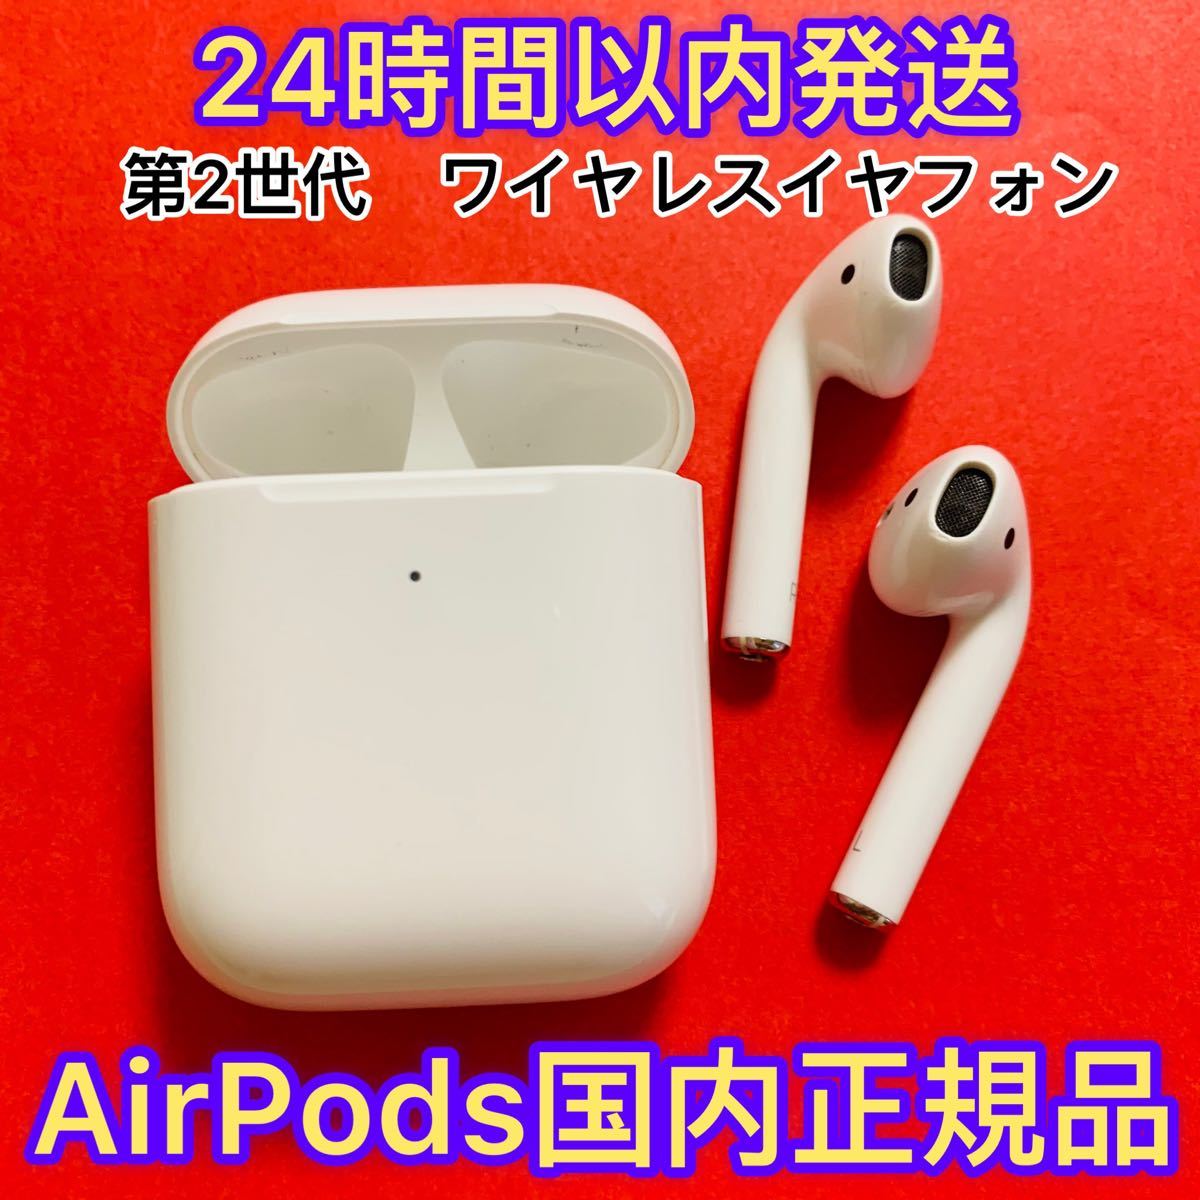 PayPayフリマ｜新品未開封 正規品 AirPods 第二世代